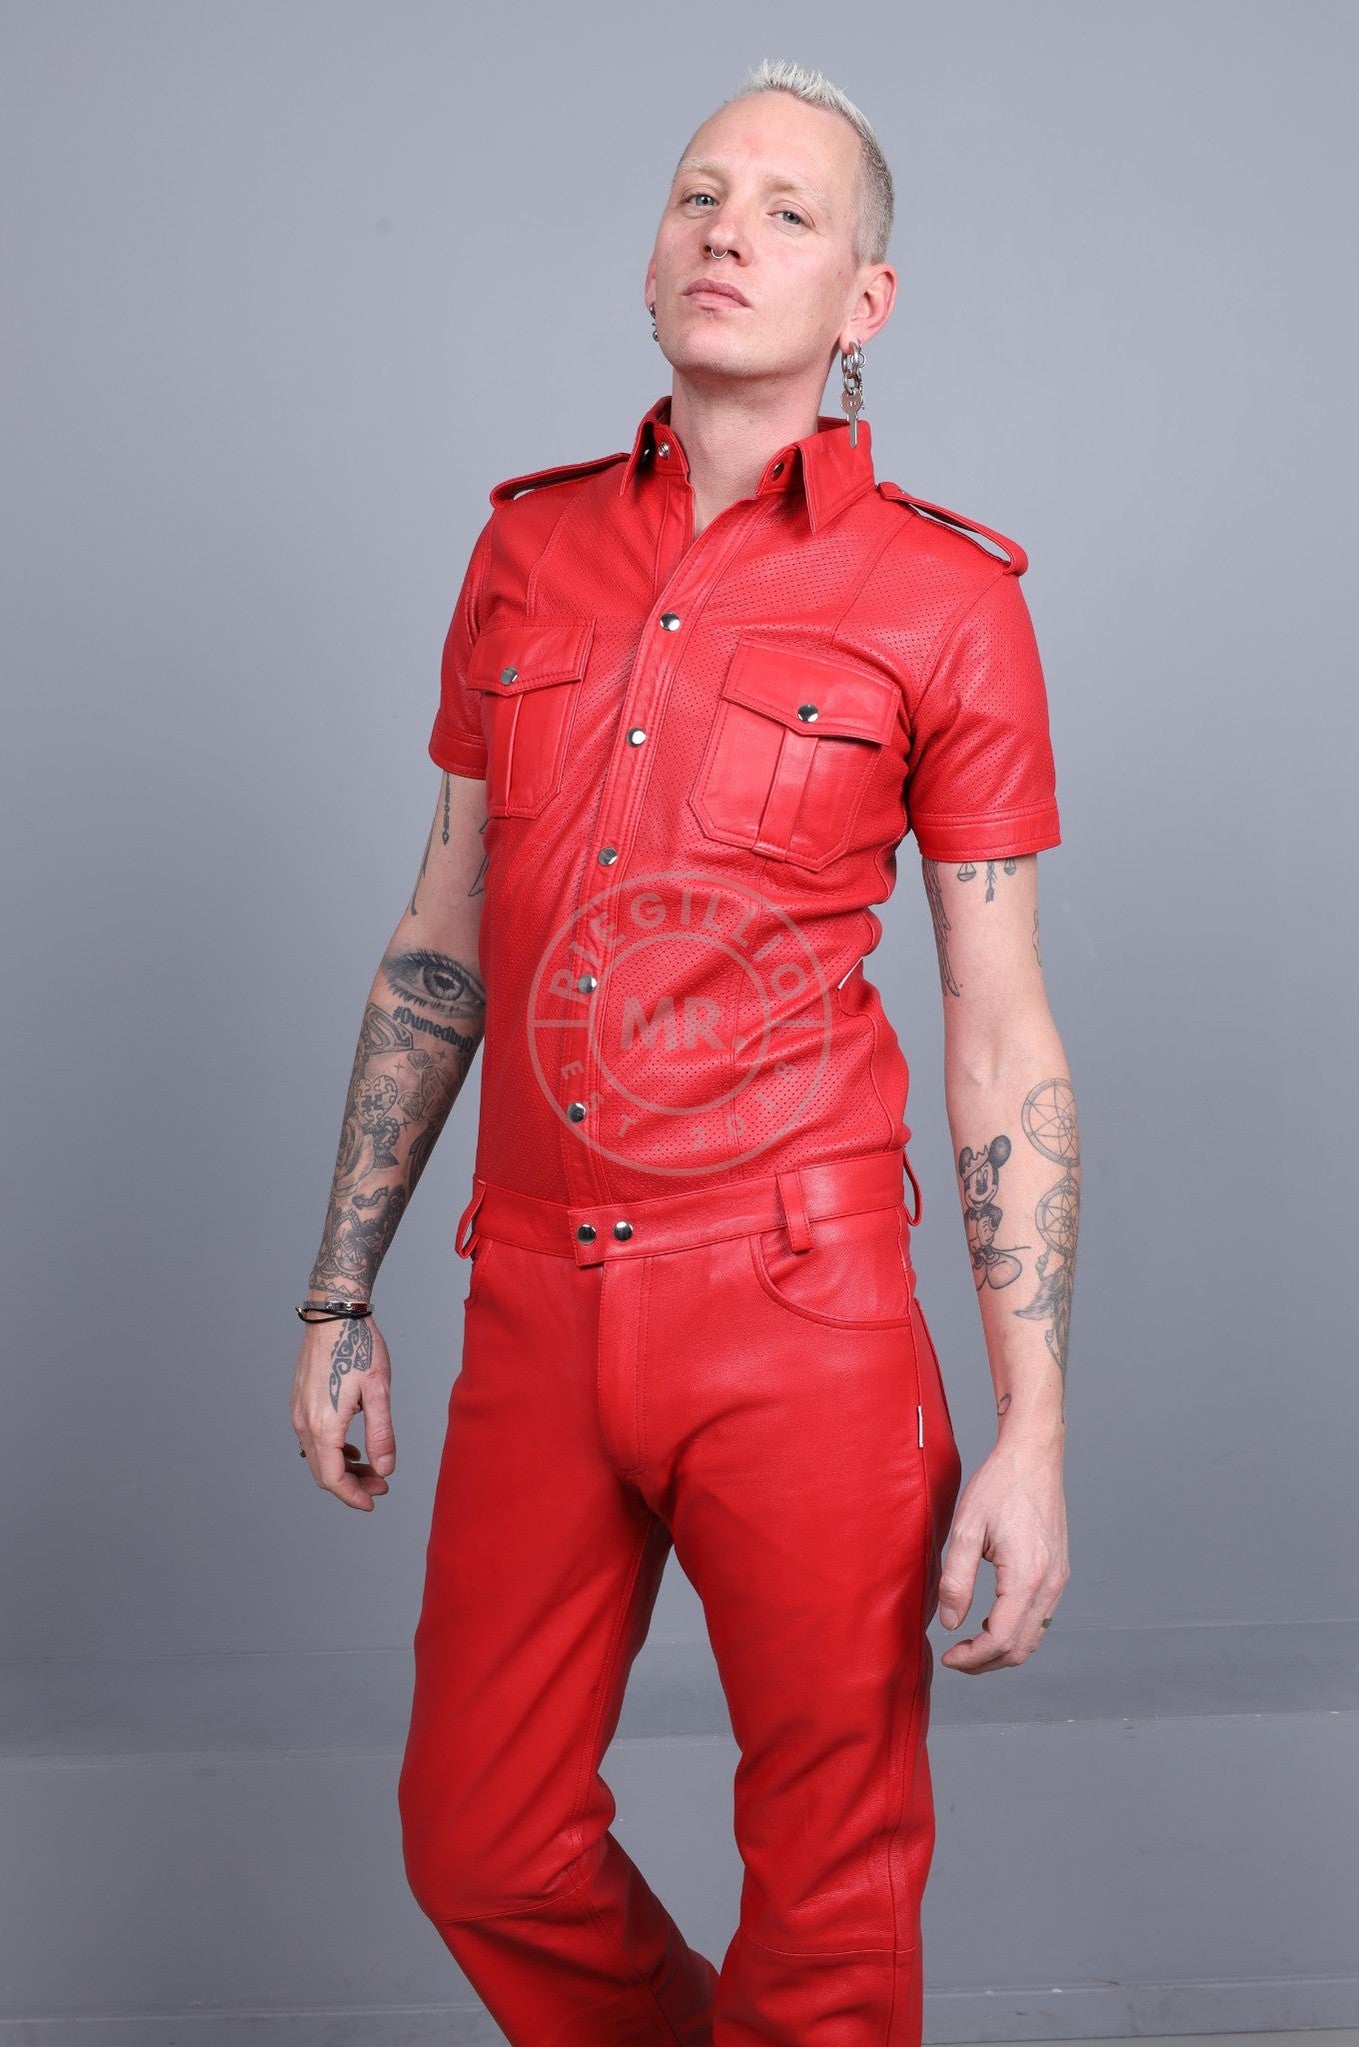 Red Leather Perforated Shirt at MR. Riegillio